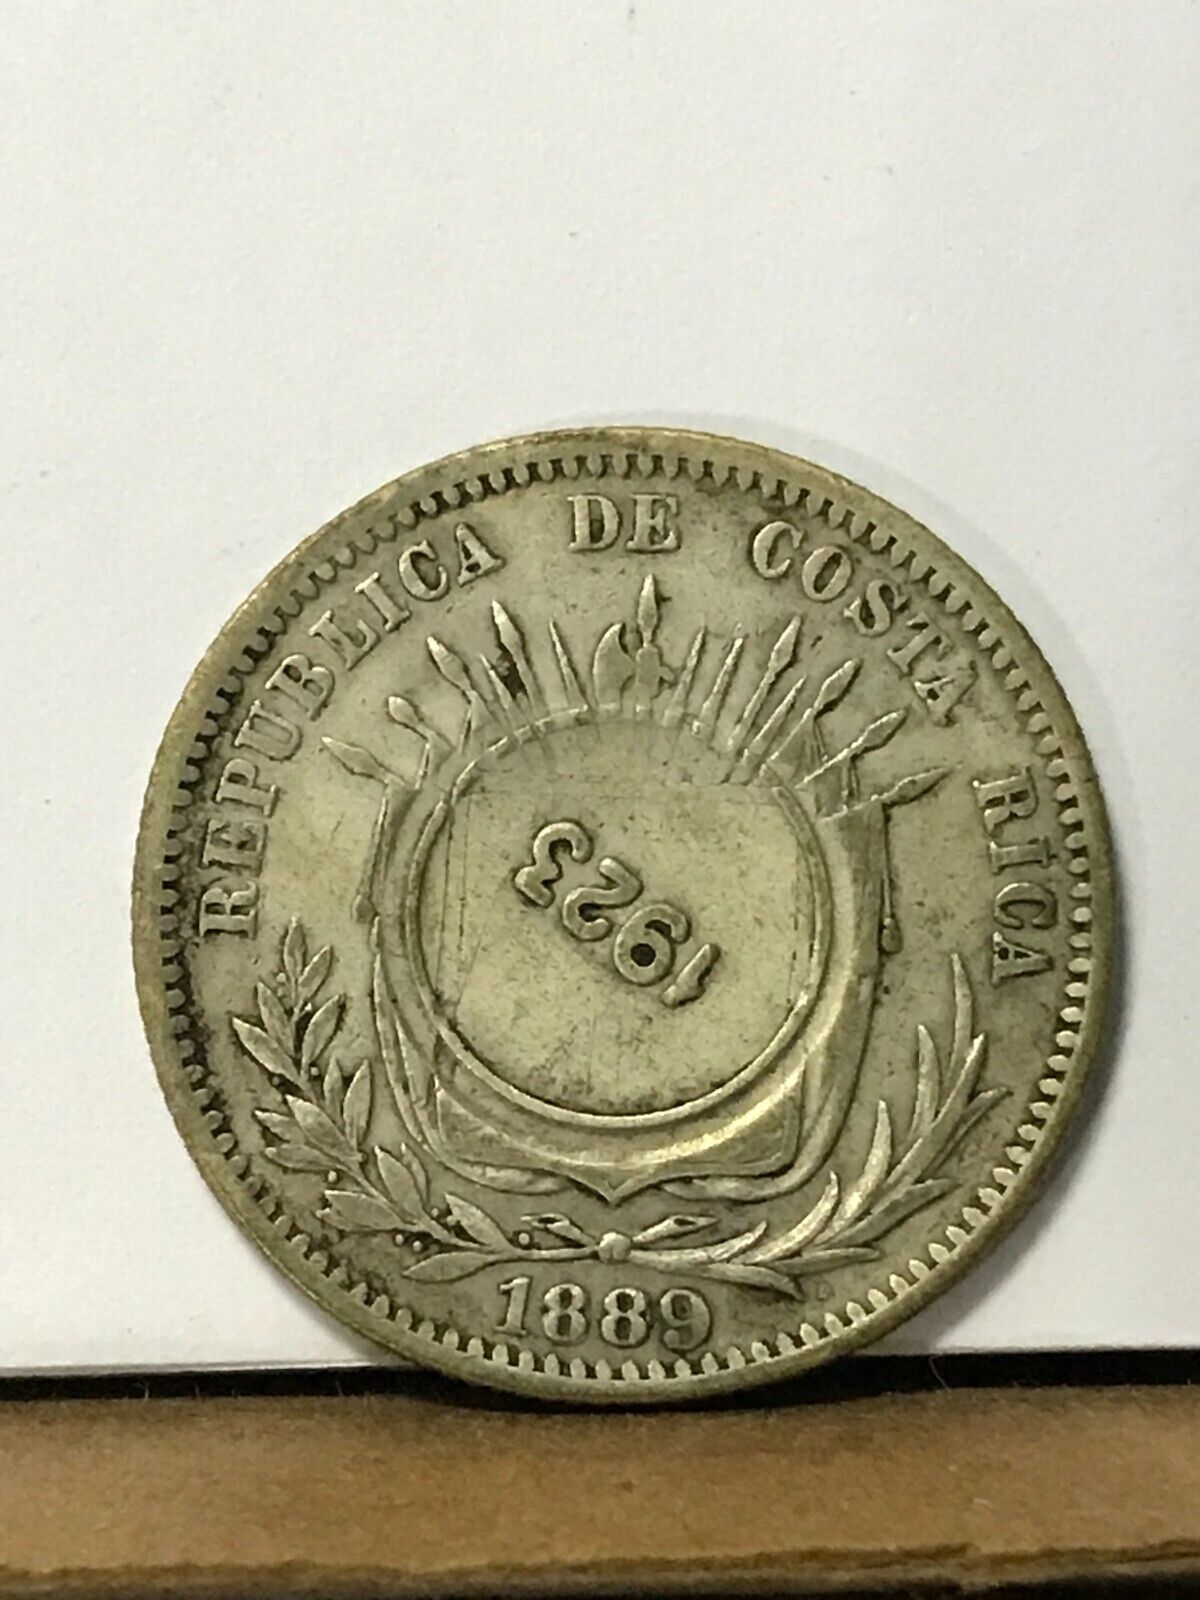 Costa Rica 1923 50 Centimos Counterstamp On 1889 25 Centimos Coin    L107